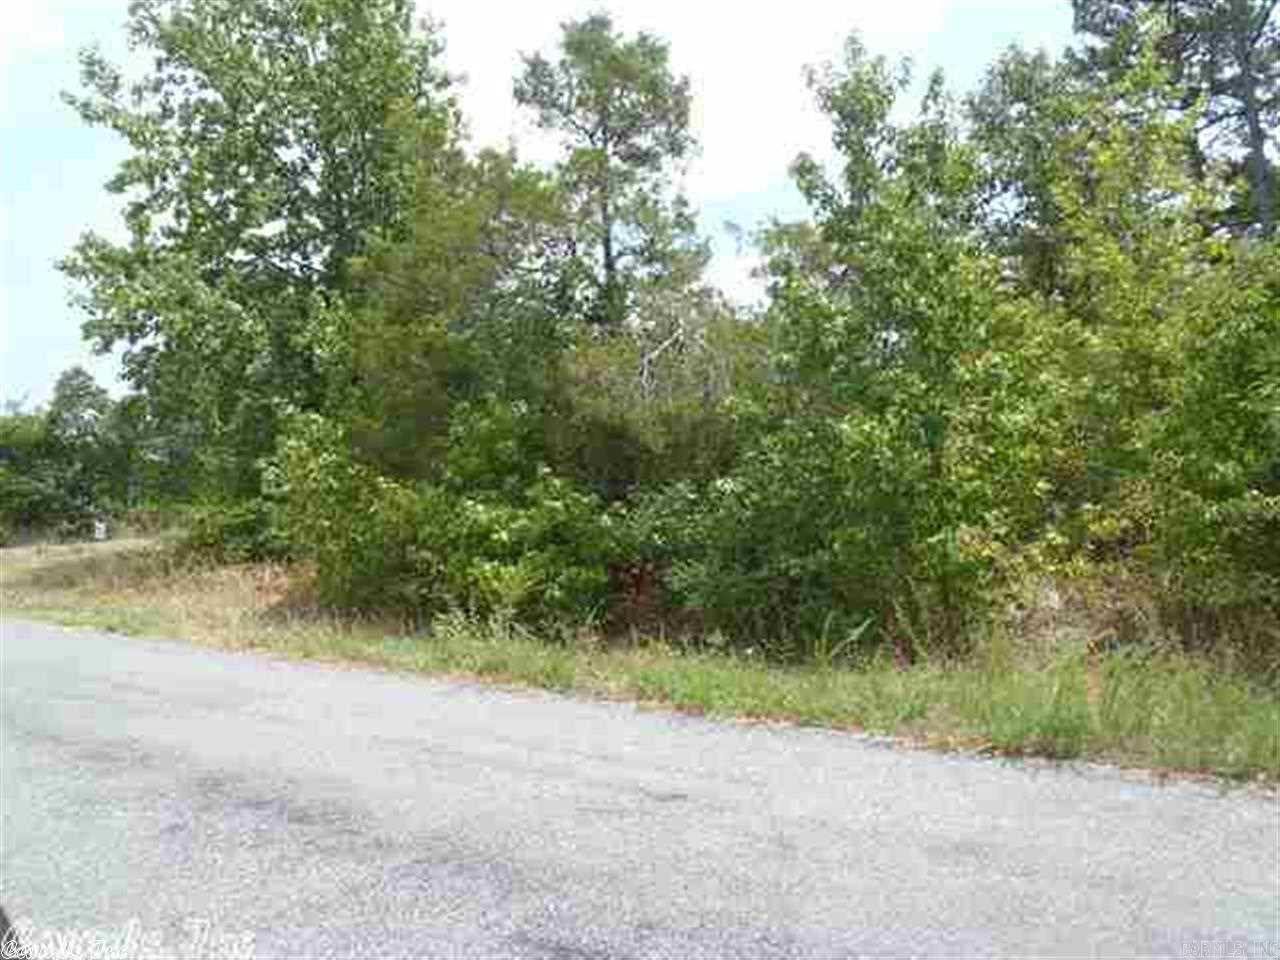 Lot 17 Trace Dr. Greers Ferry, AR 72067